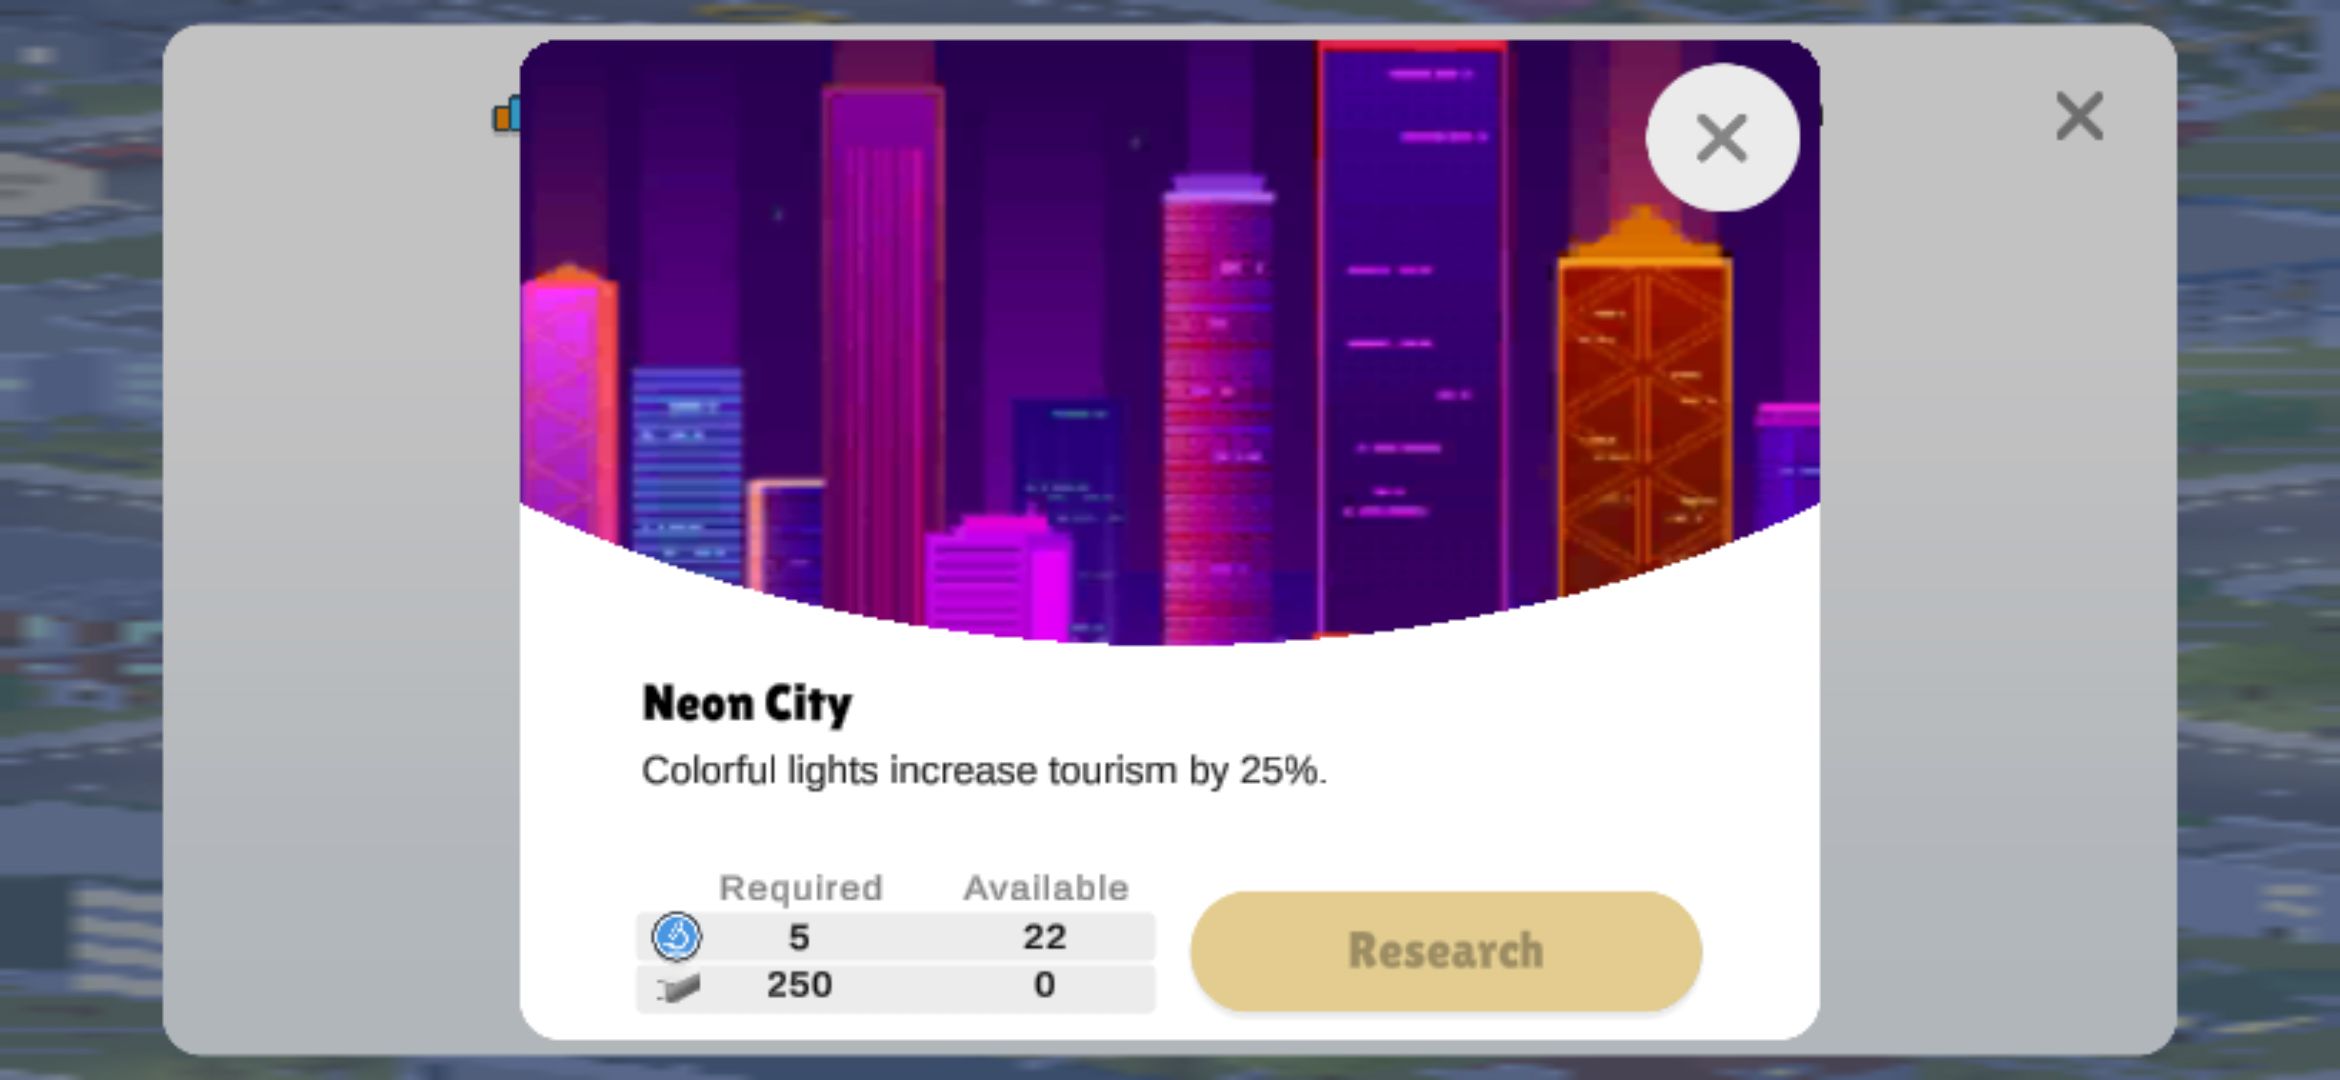 Pocket City 2 Neon City research